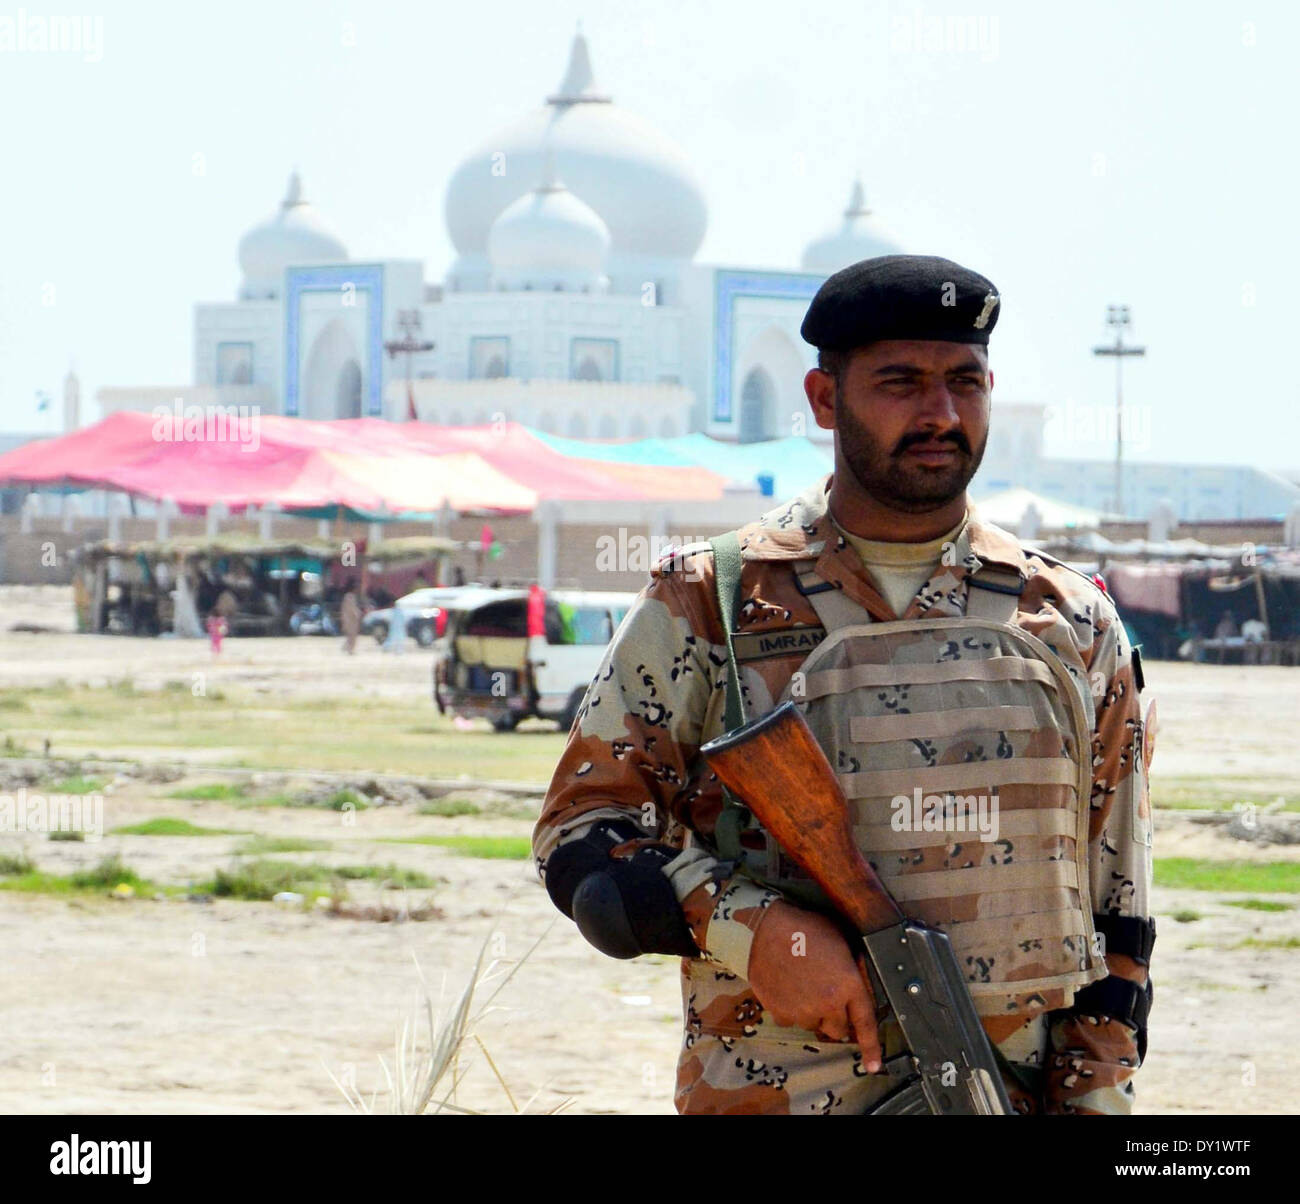 Security officials has been deputed around mausoleum of Zulfiqar Ali Bhutto on the occasion of his 35th death anniversary celebrations, in Garhi Khuda Bux on Thursday, April 03, 2014. Credit:  Asianet-Pakistan/Alamy Live News Stock Photo